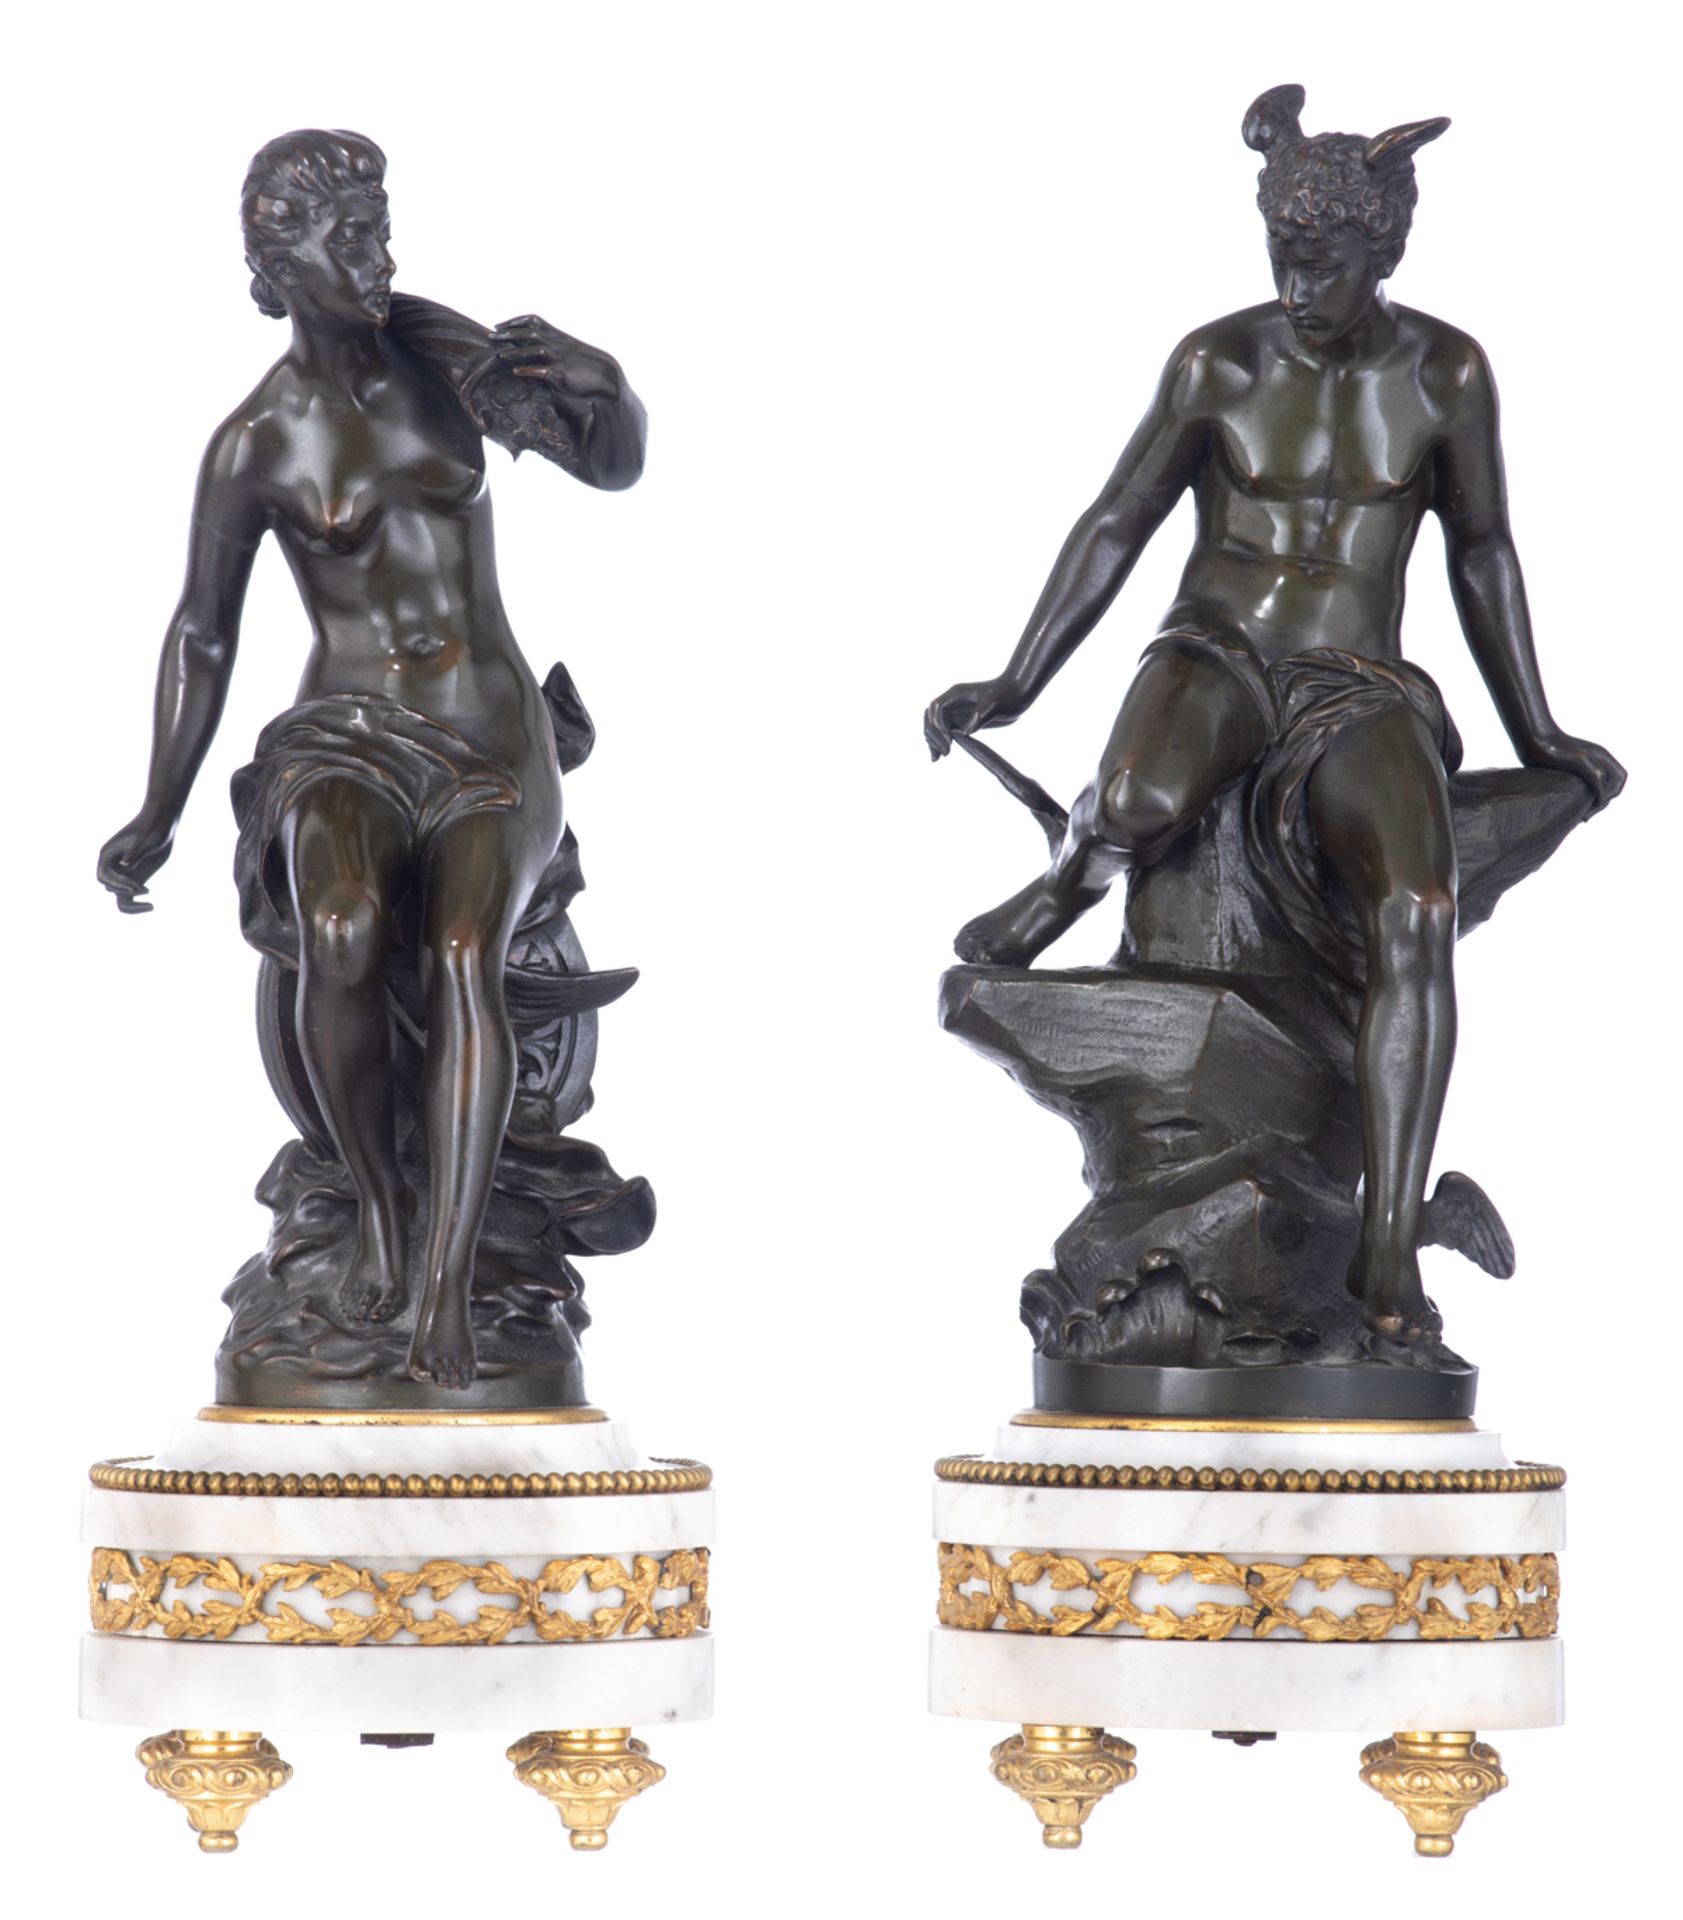 A fine pair of patinated bronze figures on a Neoclassical Carrara marble base with gilt bronze mount